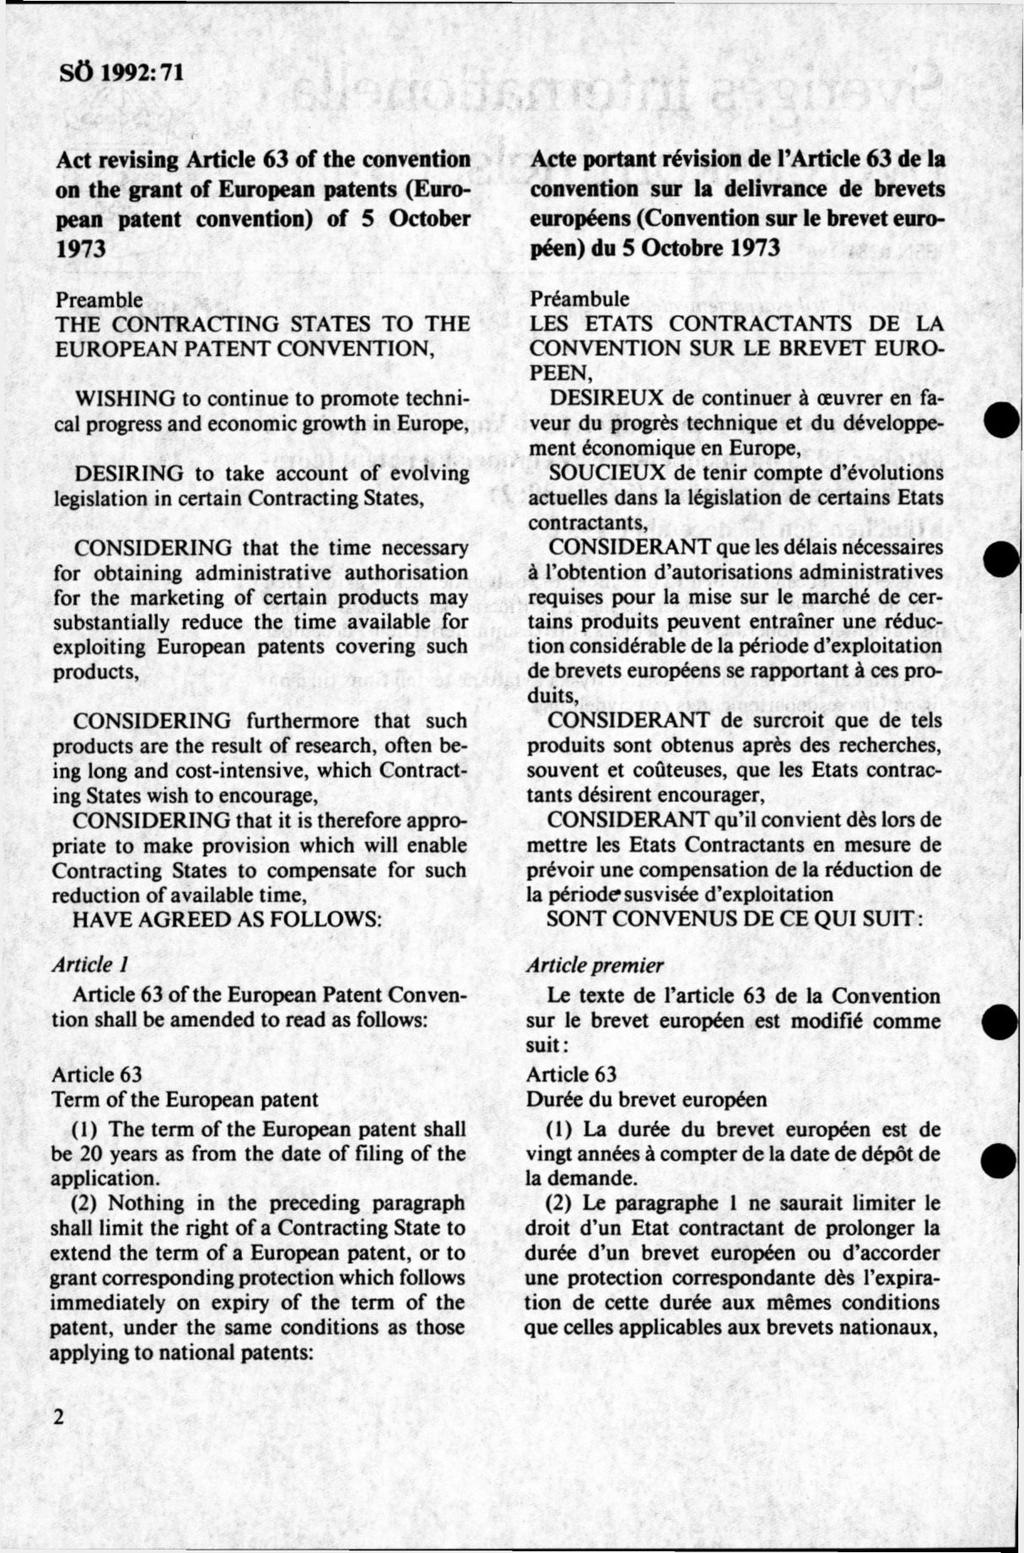 Act revising Artide 63 of the convention on the grant of European patents (European patent convention) of 5 October 1973 Preamble THE CONTRACTING STATES TO THE EUROPEAN PATENT CONVENTION, WISHING to